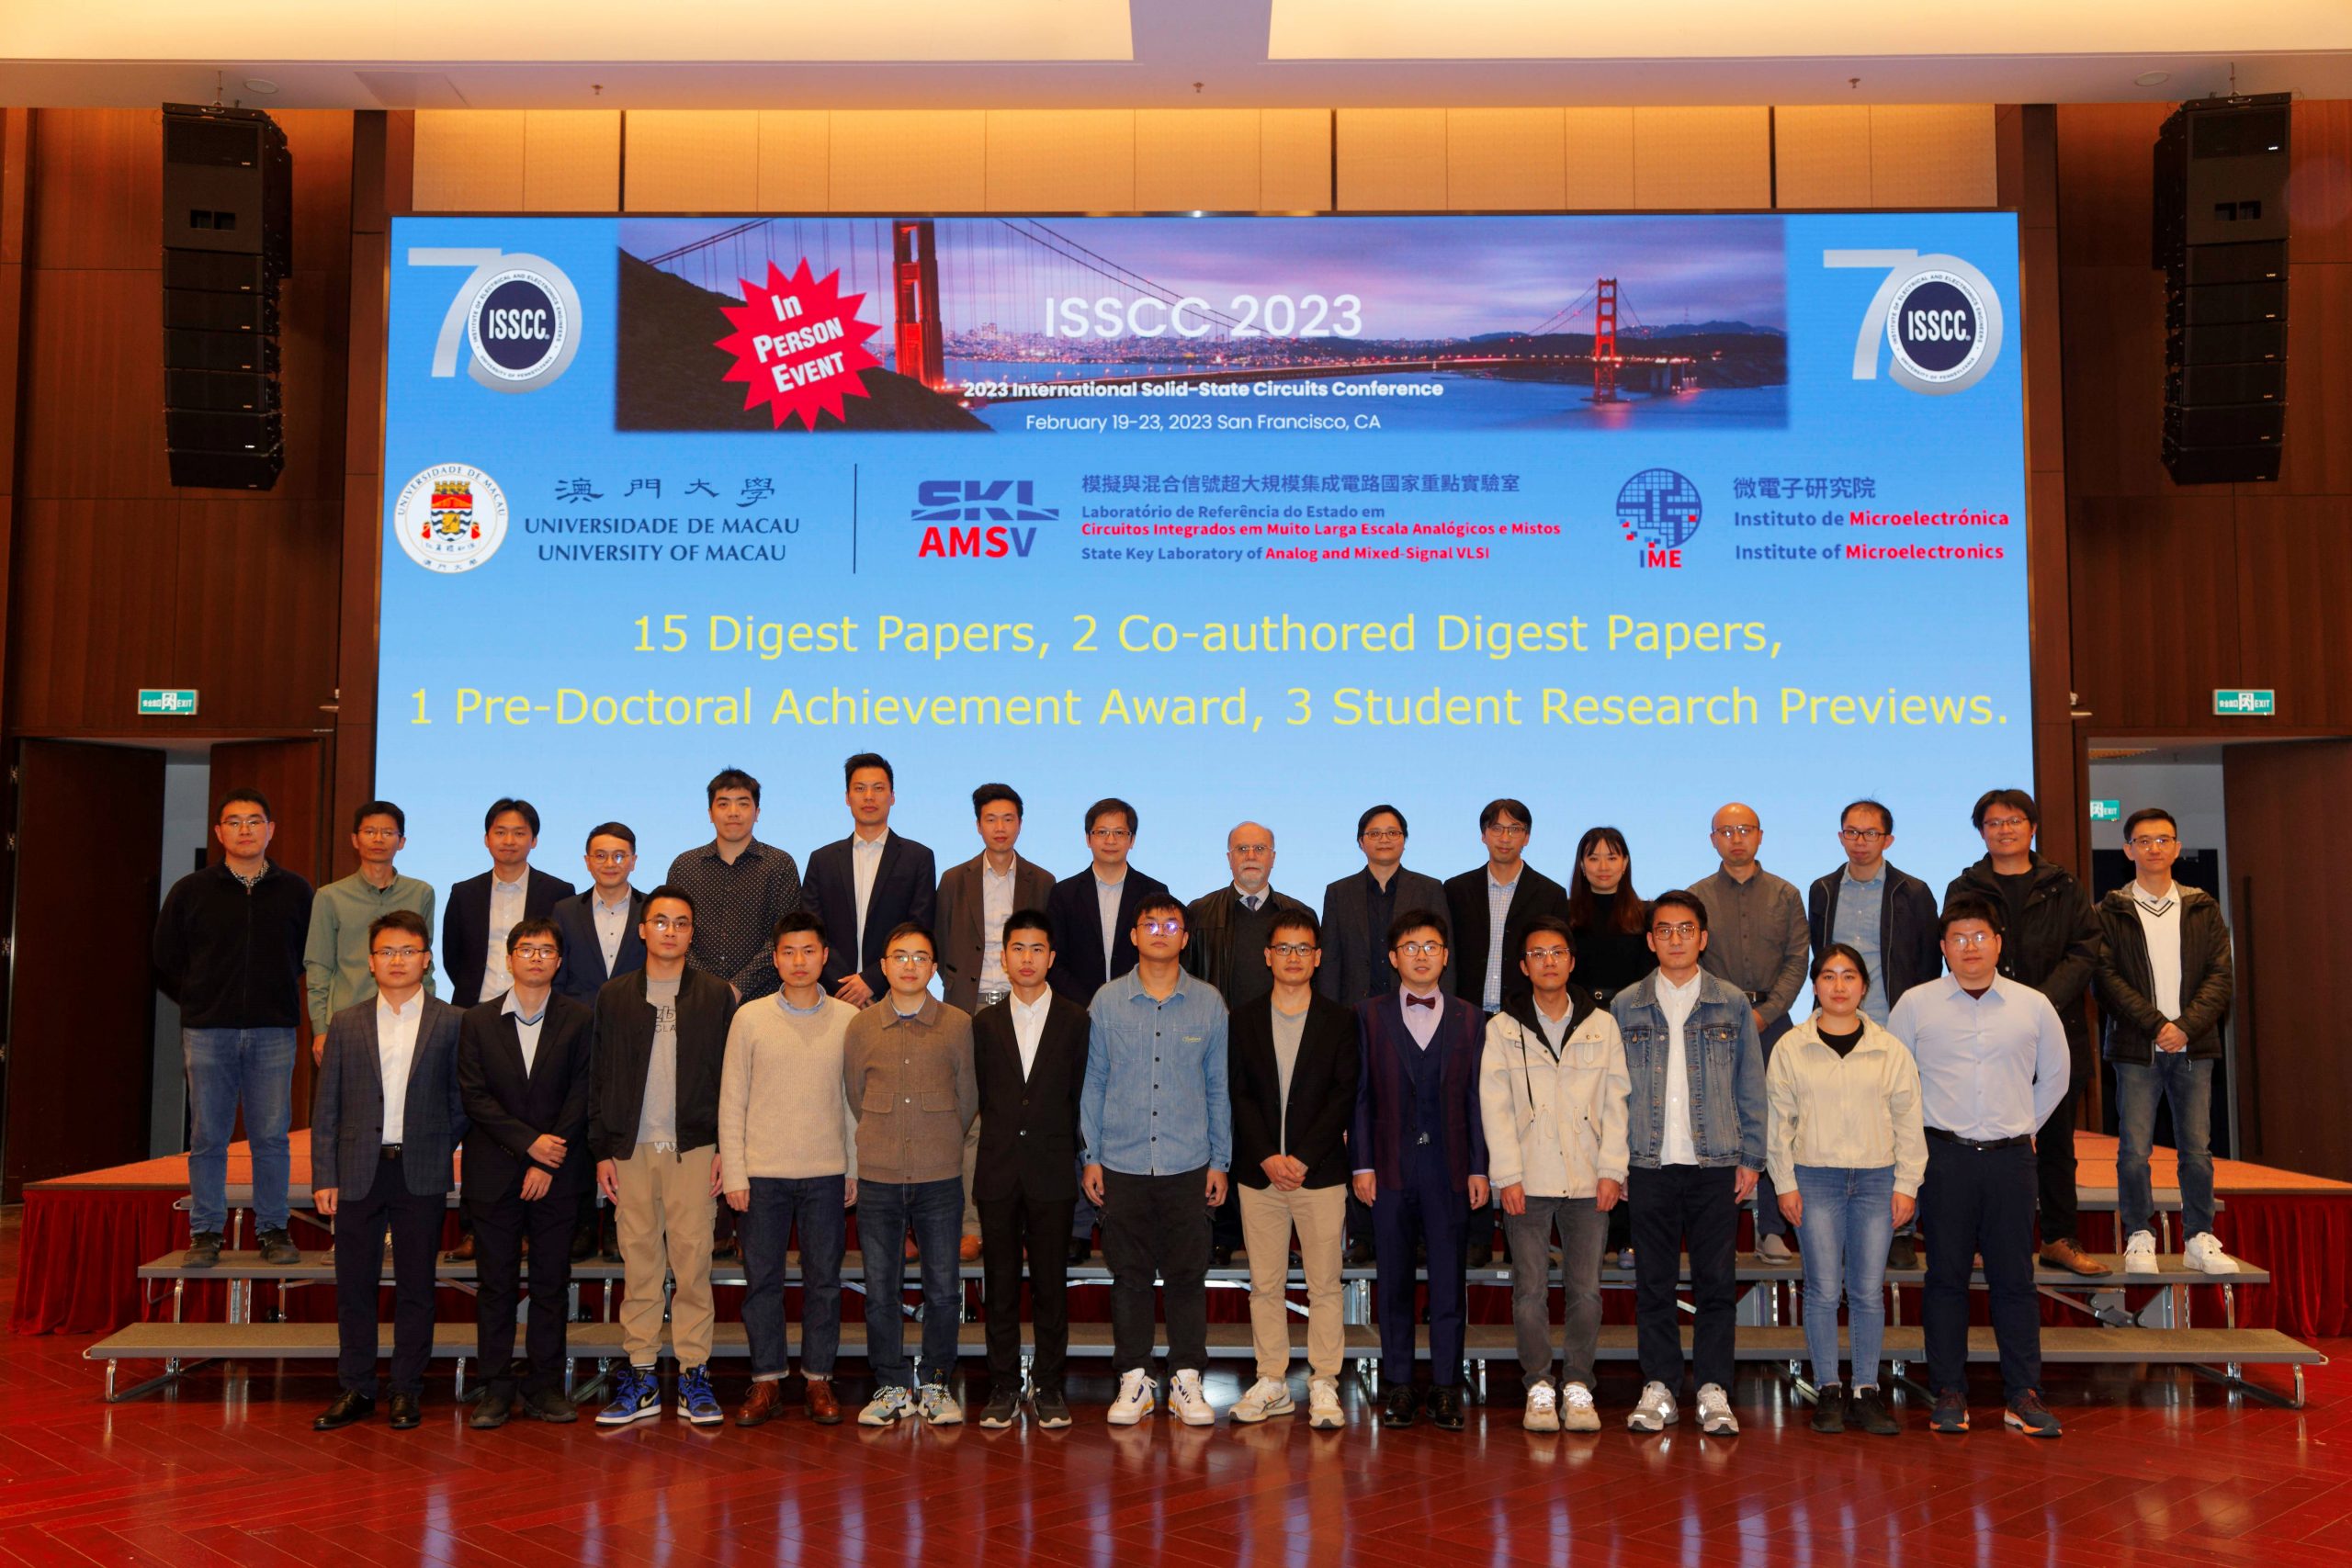 Group photo of the UM team before attending ISSCC